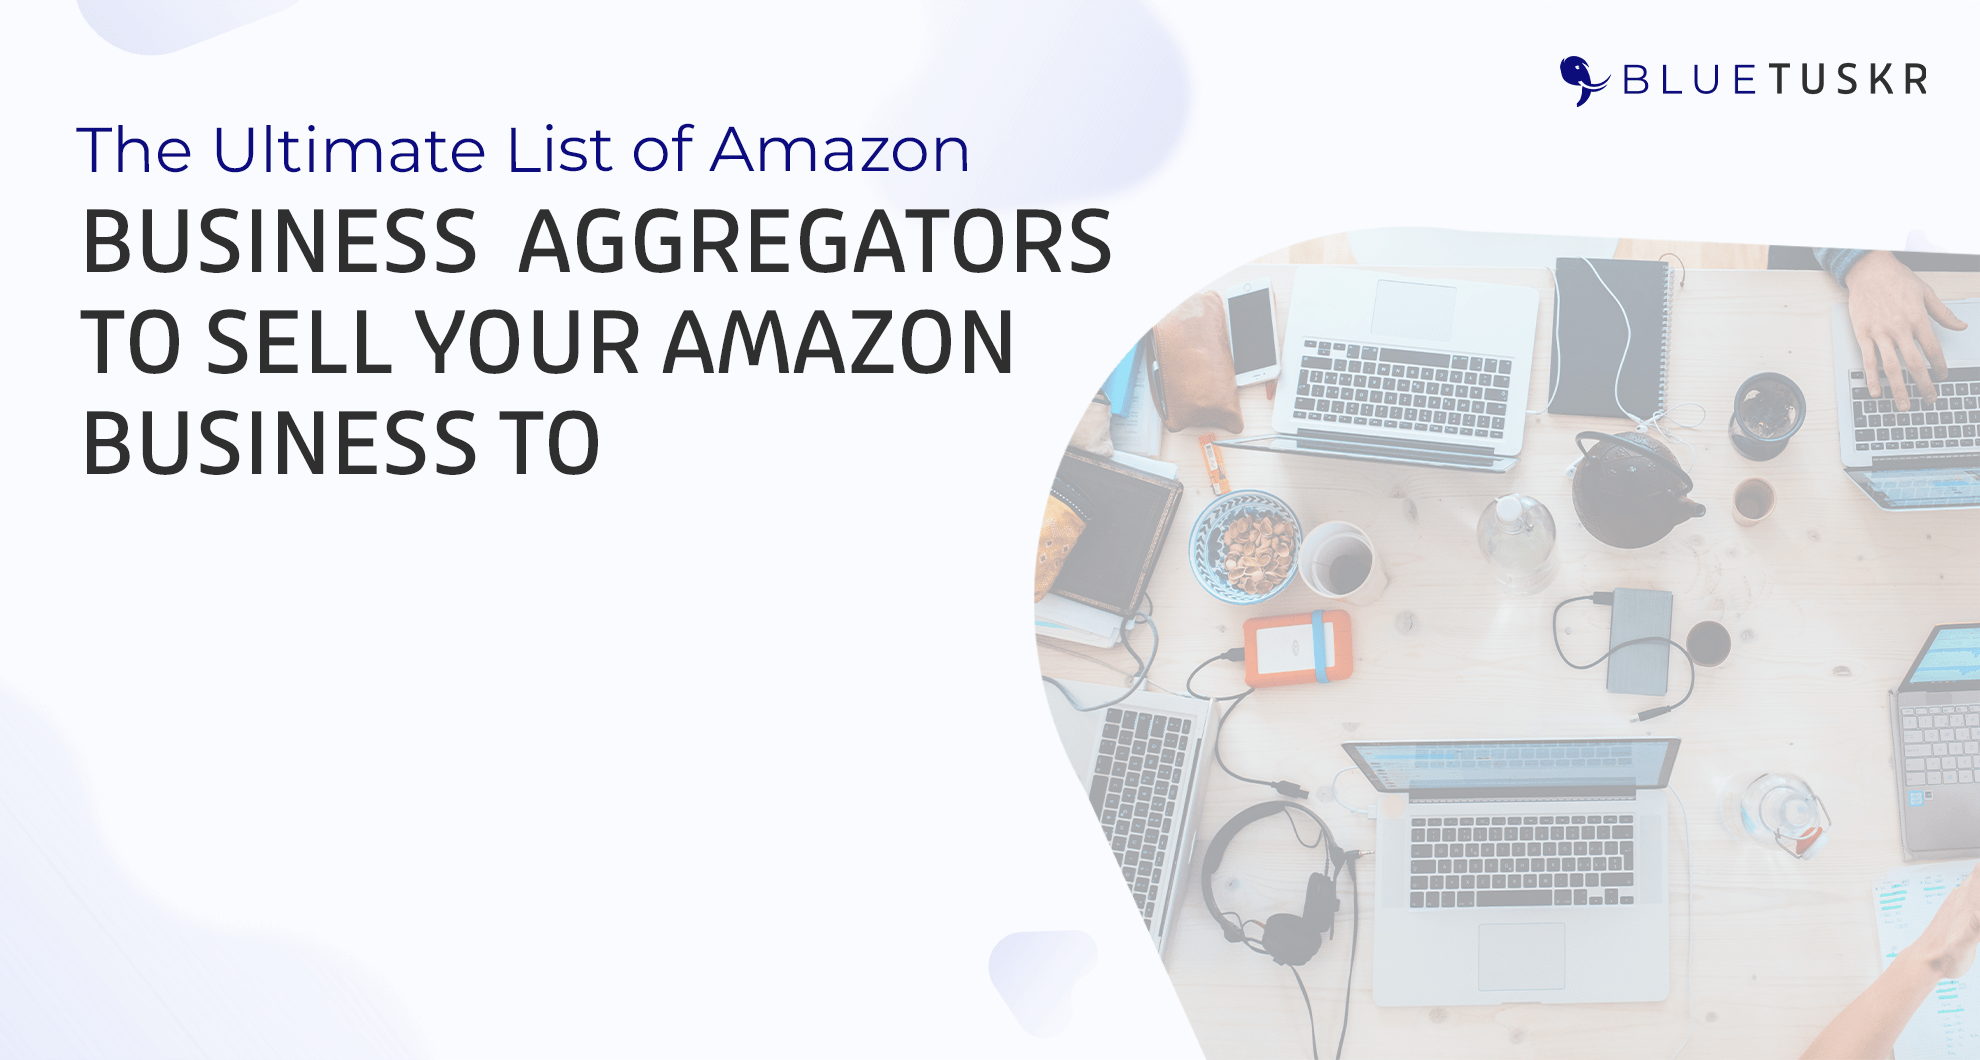 The Ultimate List Of Amazon Business Aggregators To Sell Your Amazon Business To